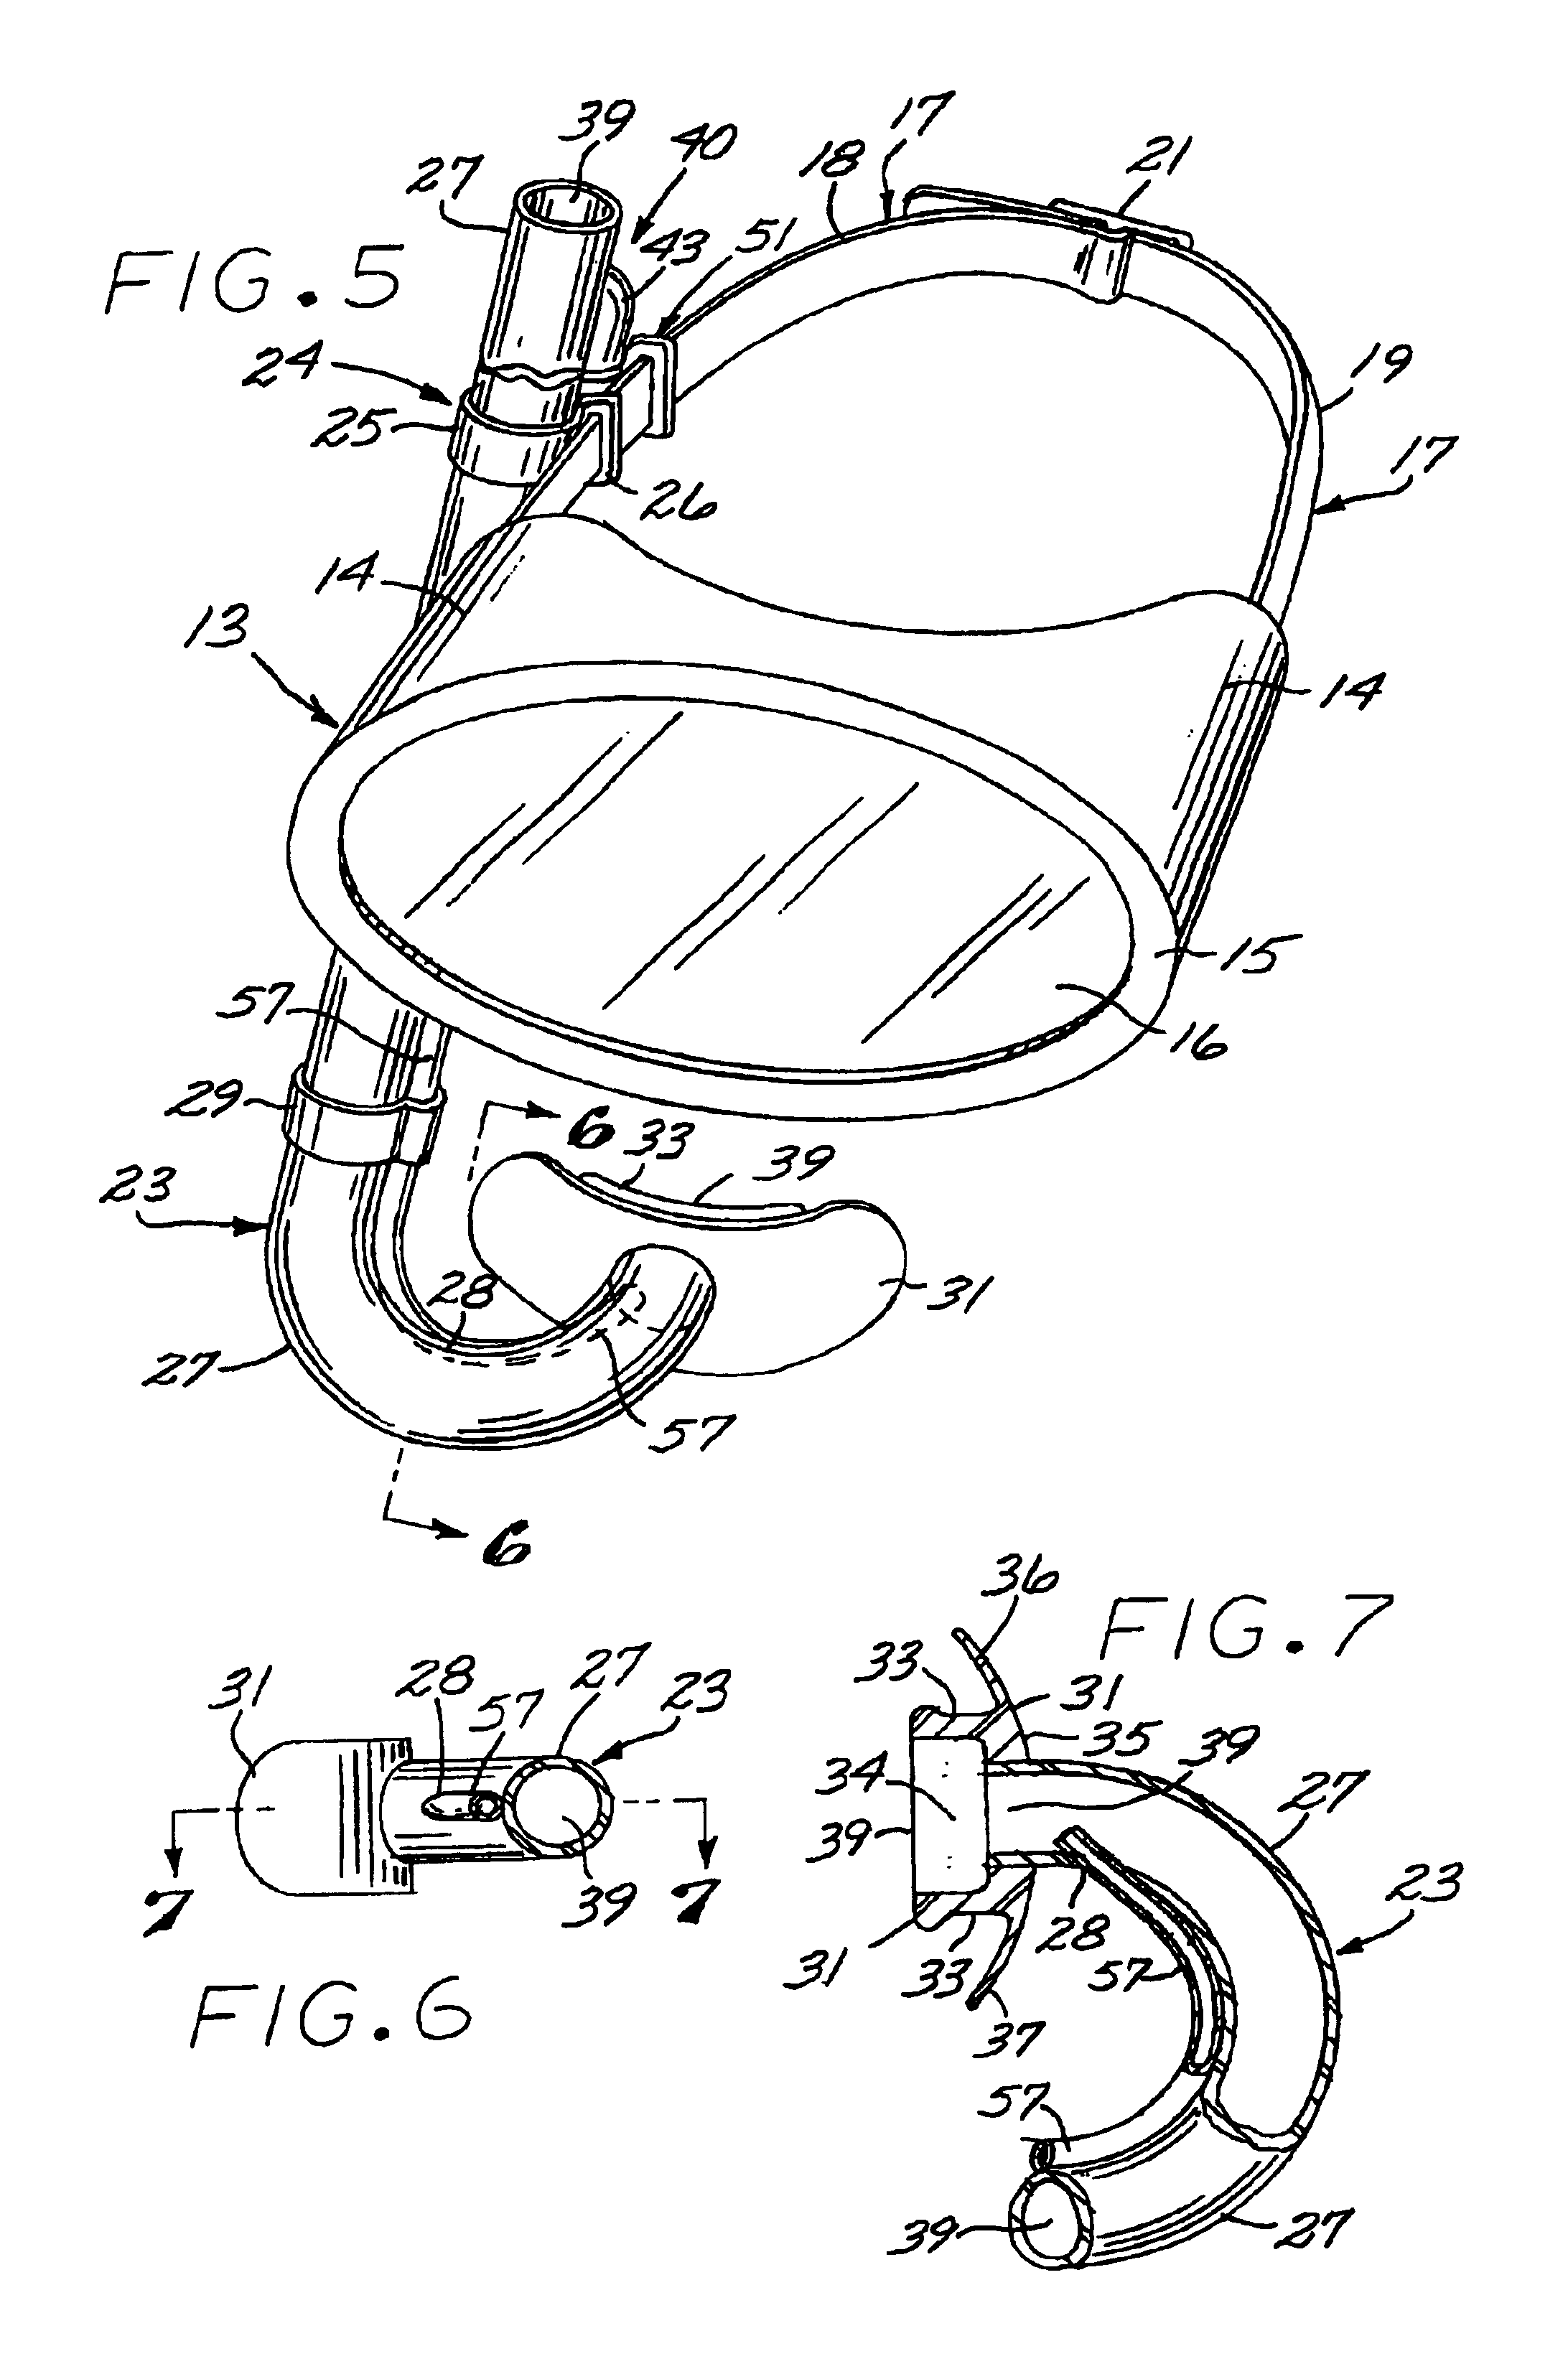 Combination oxygen supplement and swimming snorkel apparatus